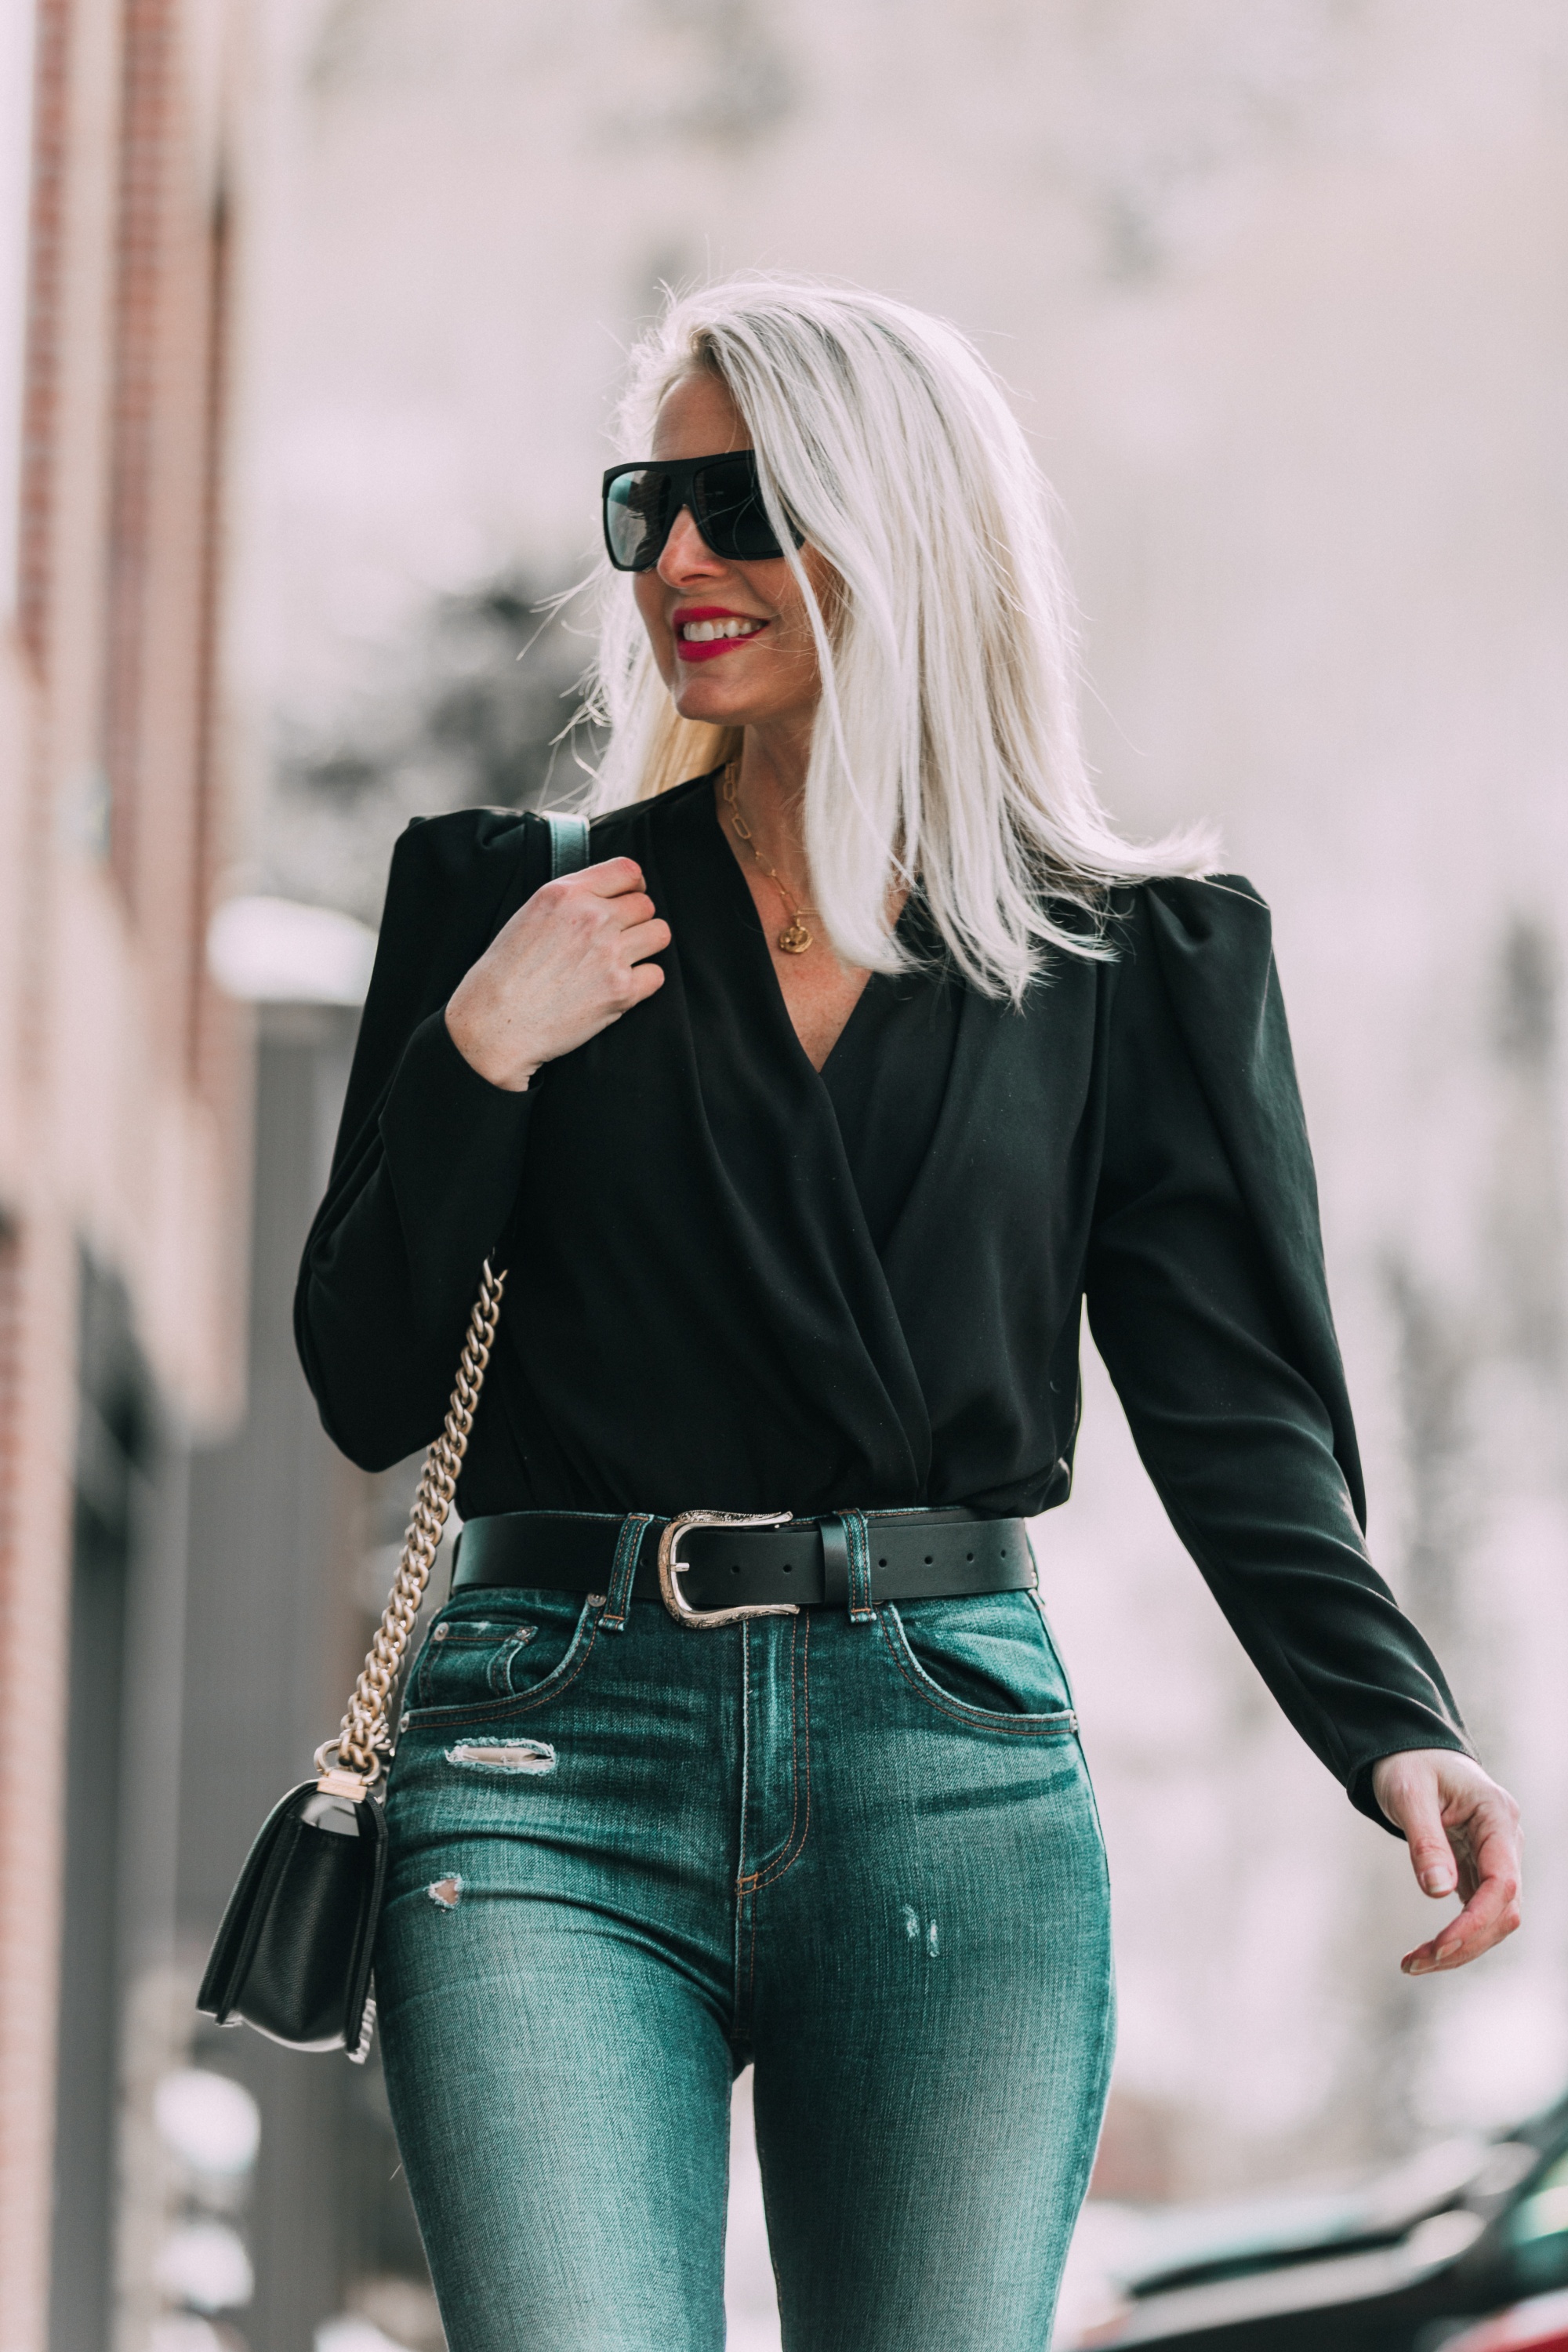 fashion blogger erin busbee of BusbeeStyle.com wearing a black top with statement puff sleeve blouse with quay flat top sunglasses